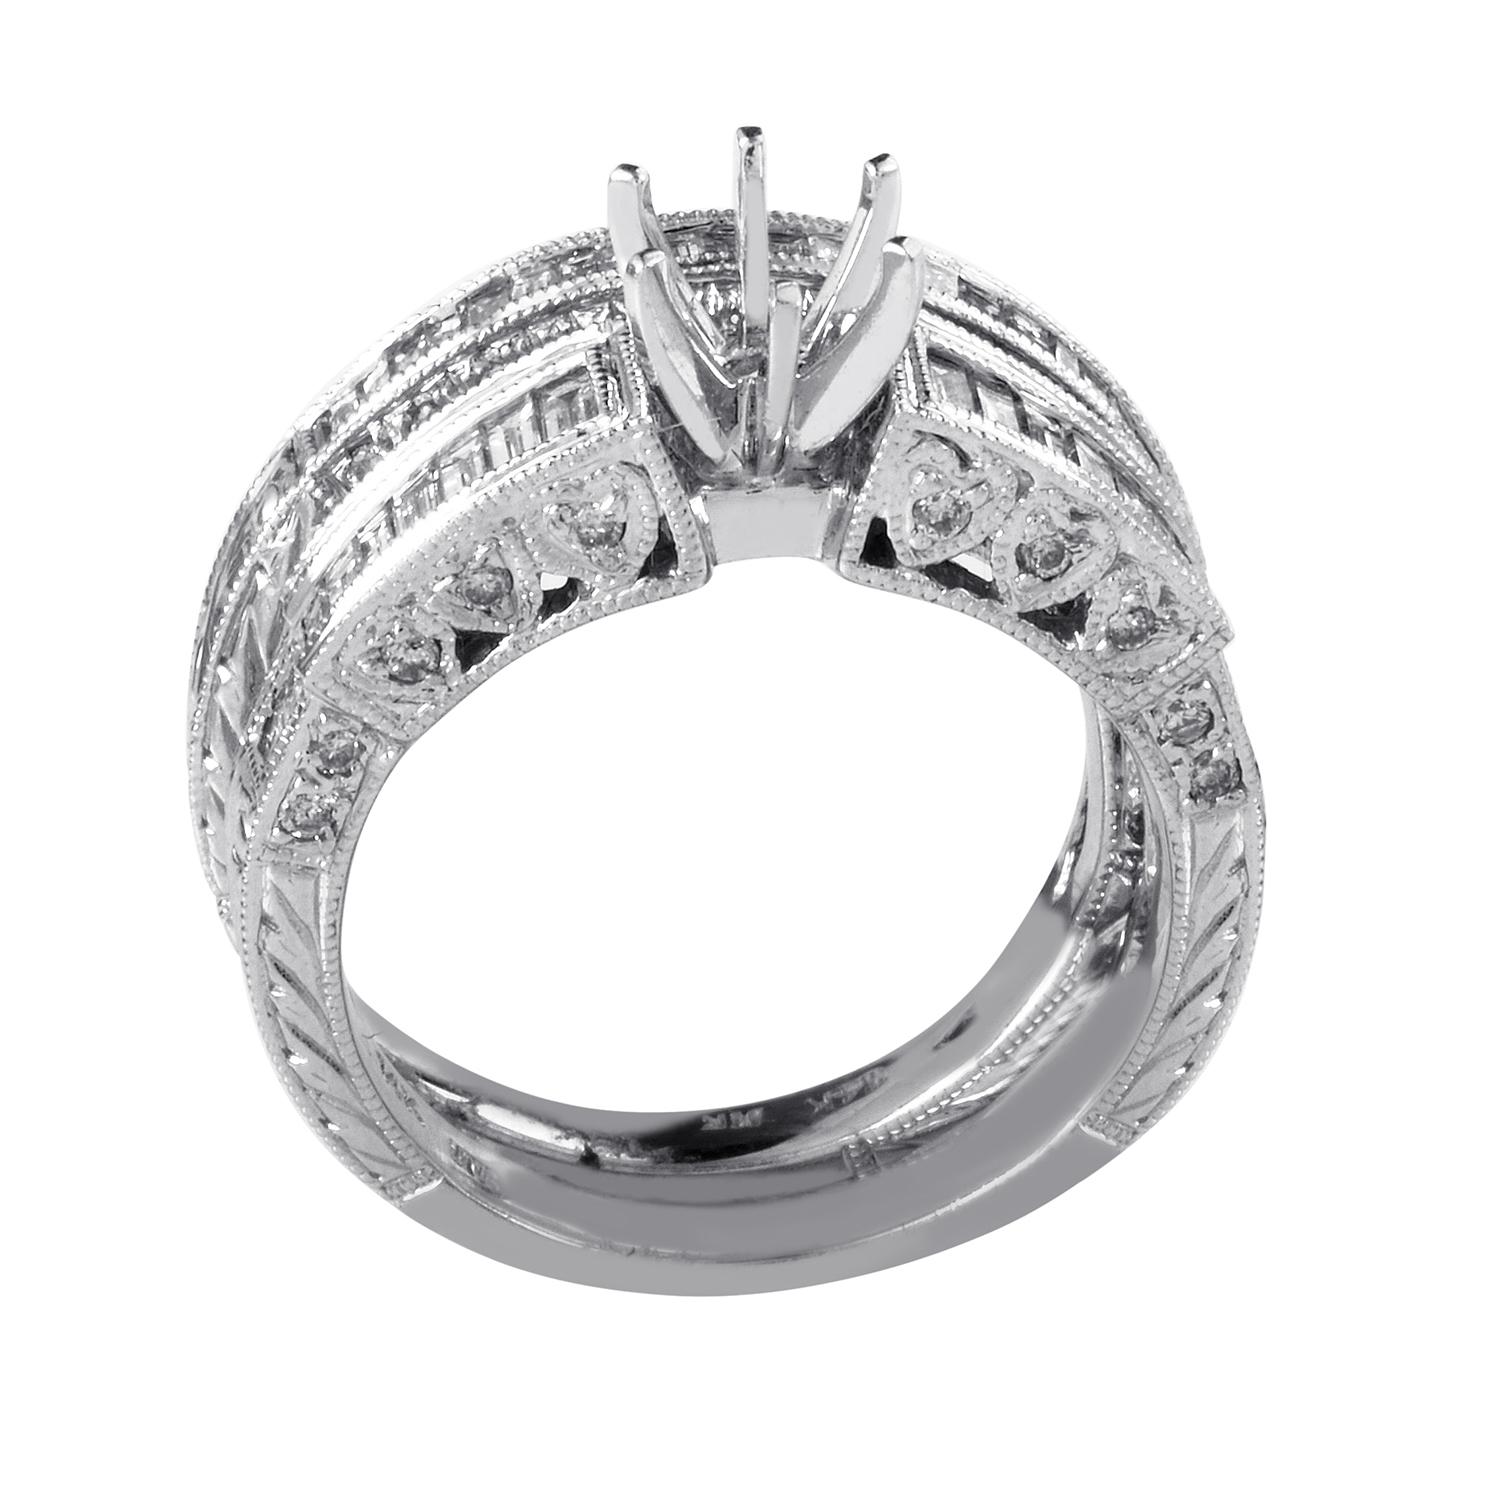 Intricate, whimsical and yet majestic, this 14K white gold ring by Natalie K is a mesmerizing ring, to have and to hold. The bands are delicately engraved, with the settings embellished in a filigree finish. Each band is lavished with diamonds -